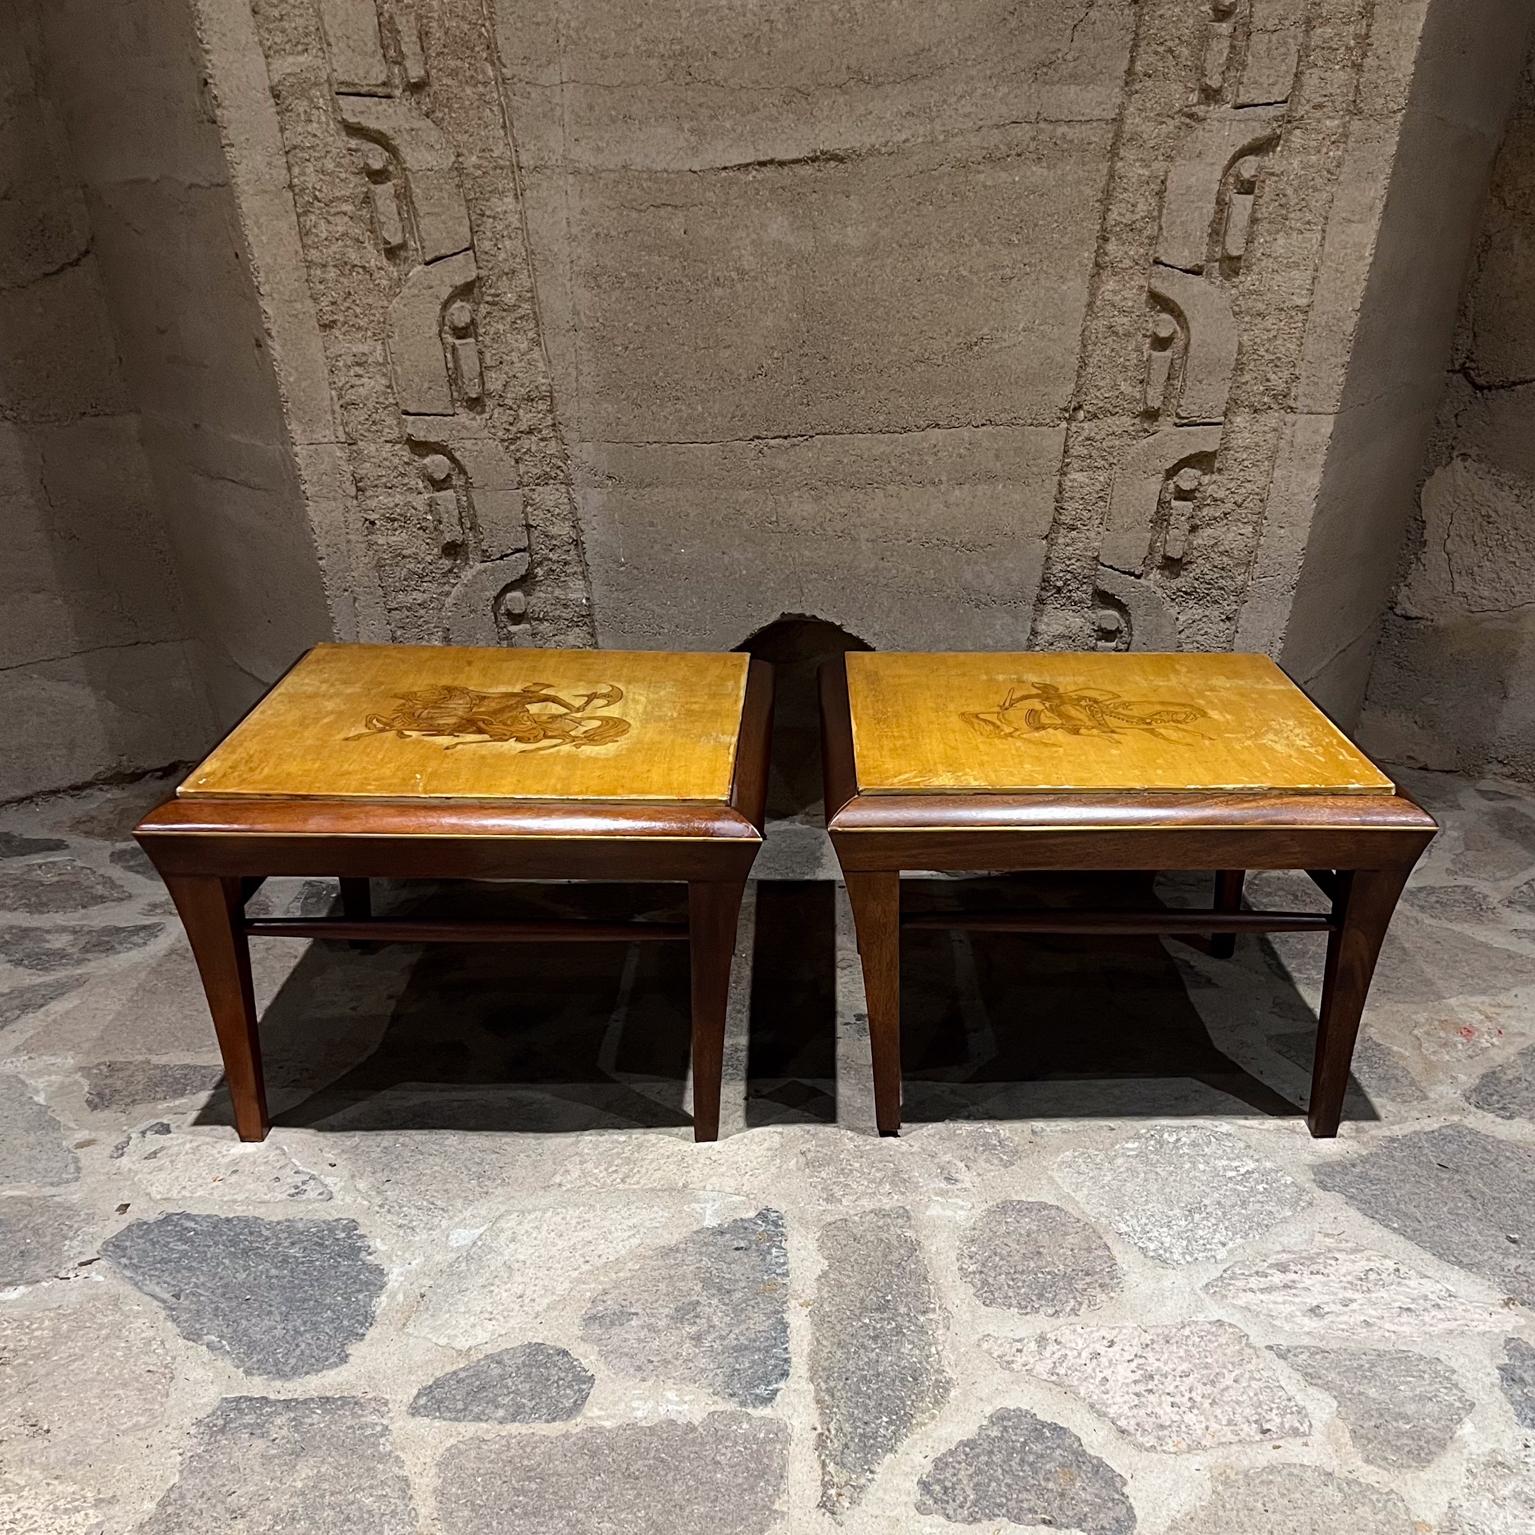 1960s Side tables in solid mahogany wood and goatskin Made in Mexico 
Postmodern design with a neoclassical flair -clean modern lines. 
Hand painted Roman motif. 
The tables are unsigned. The work is consistent with the pieces produced by Maria